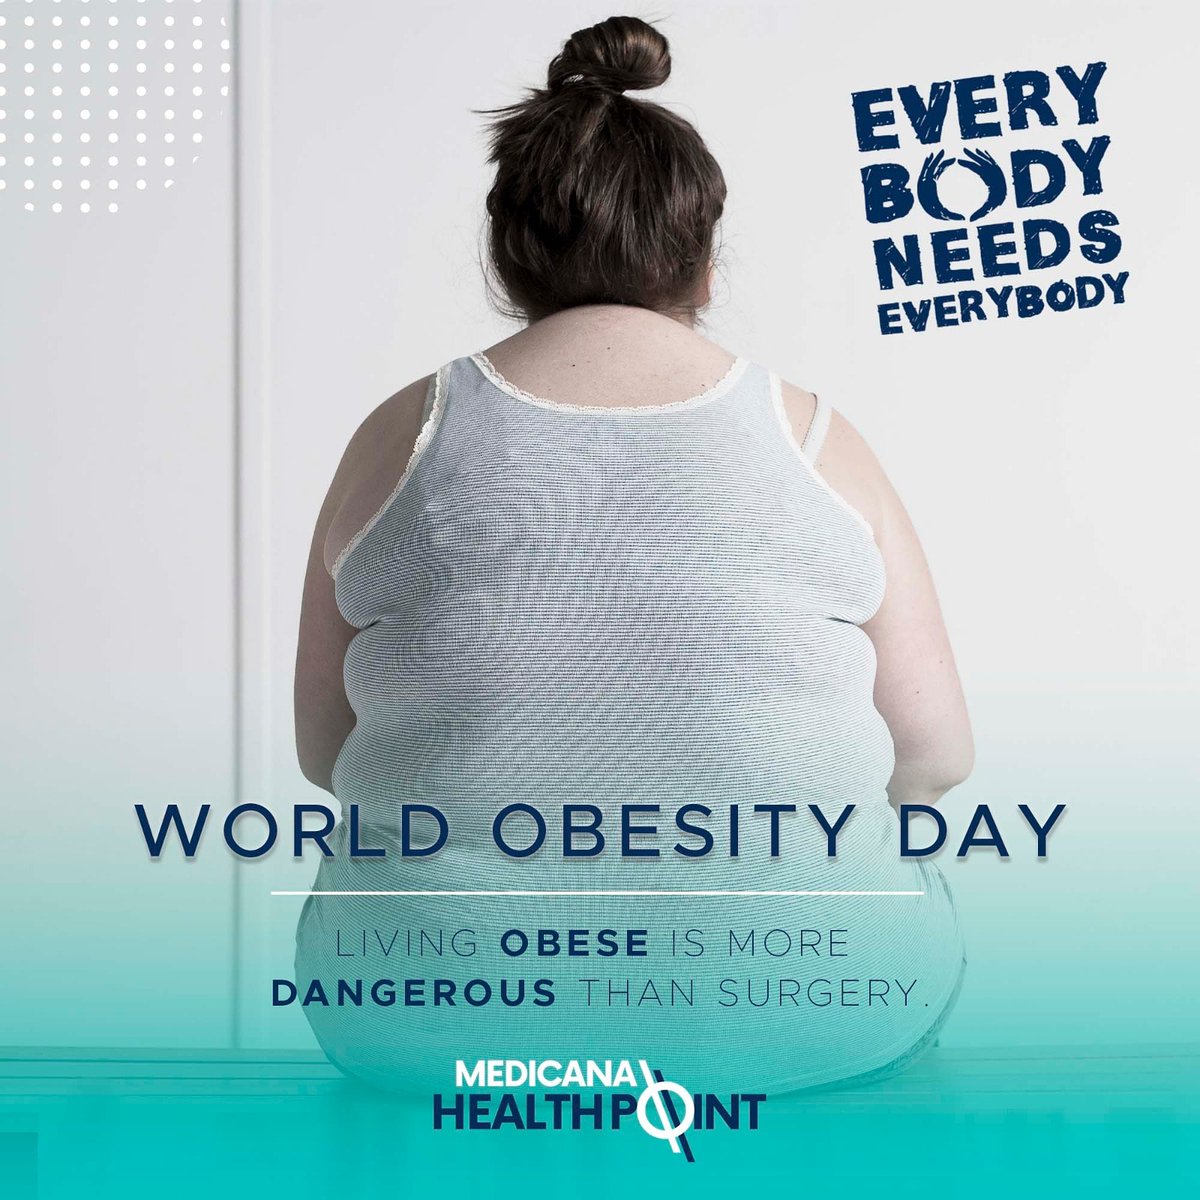 Lıvıng Obese Is More Dangerous Than Surgery.

#worldobesiytday #everybodyneedseverybody #obesity #obesitysurgery #obesitytreatment #fat #overweight #calorie #treatment #excessweight #obesitydisease #diettherapy #exercisetherapy #who #instagood #medicana #medicanahealthpoint